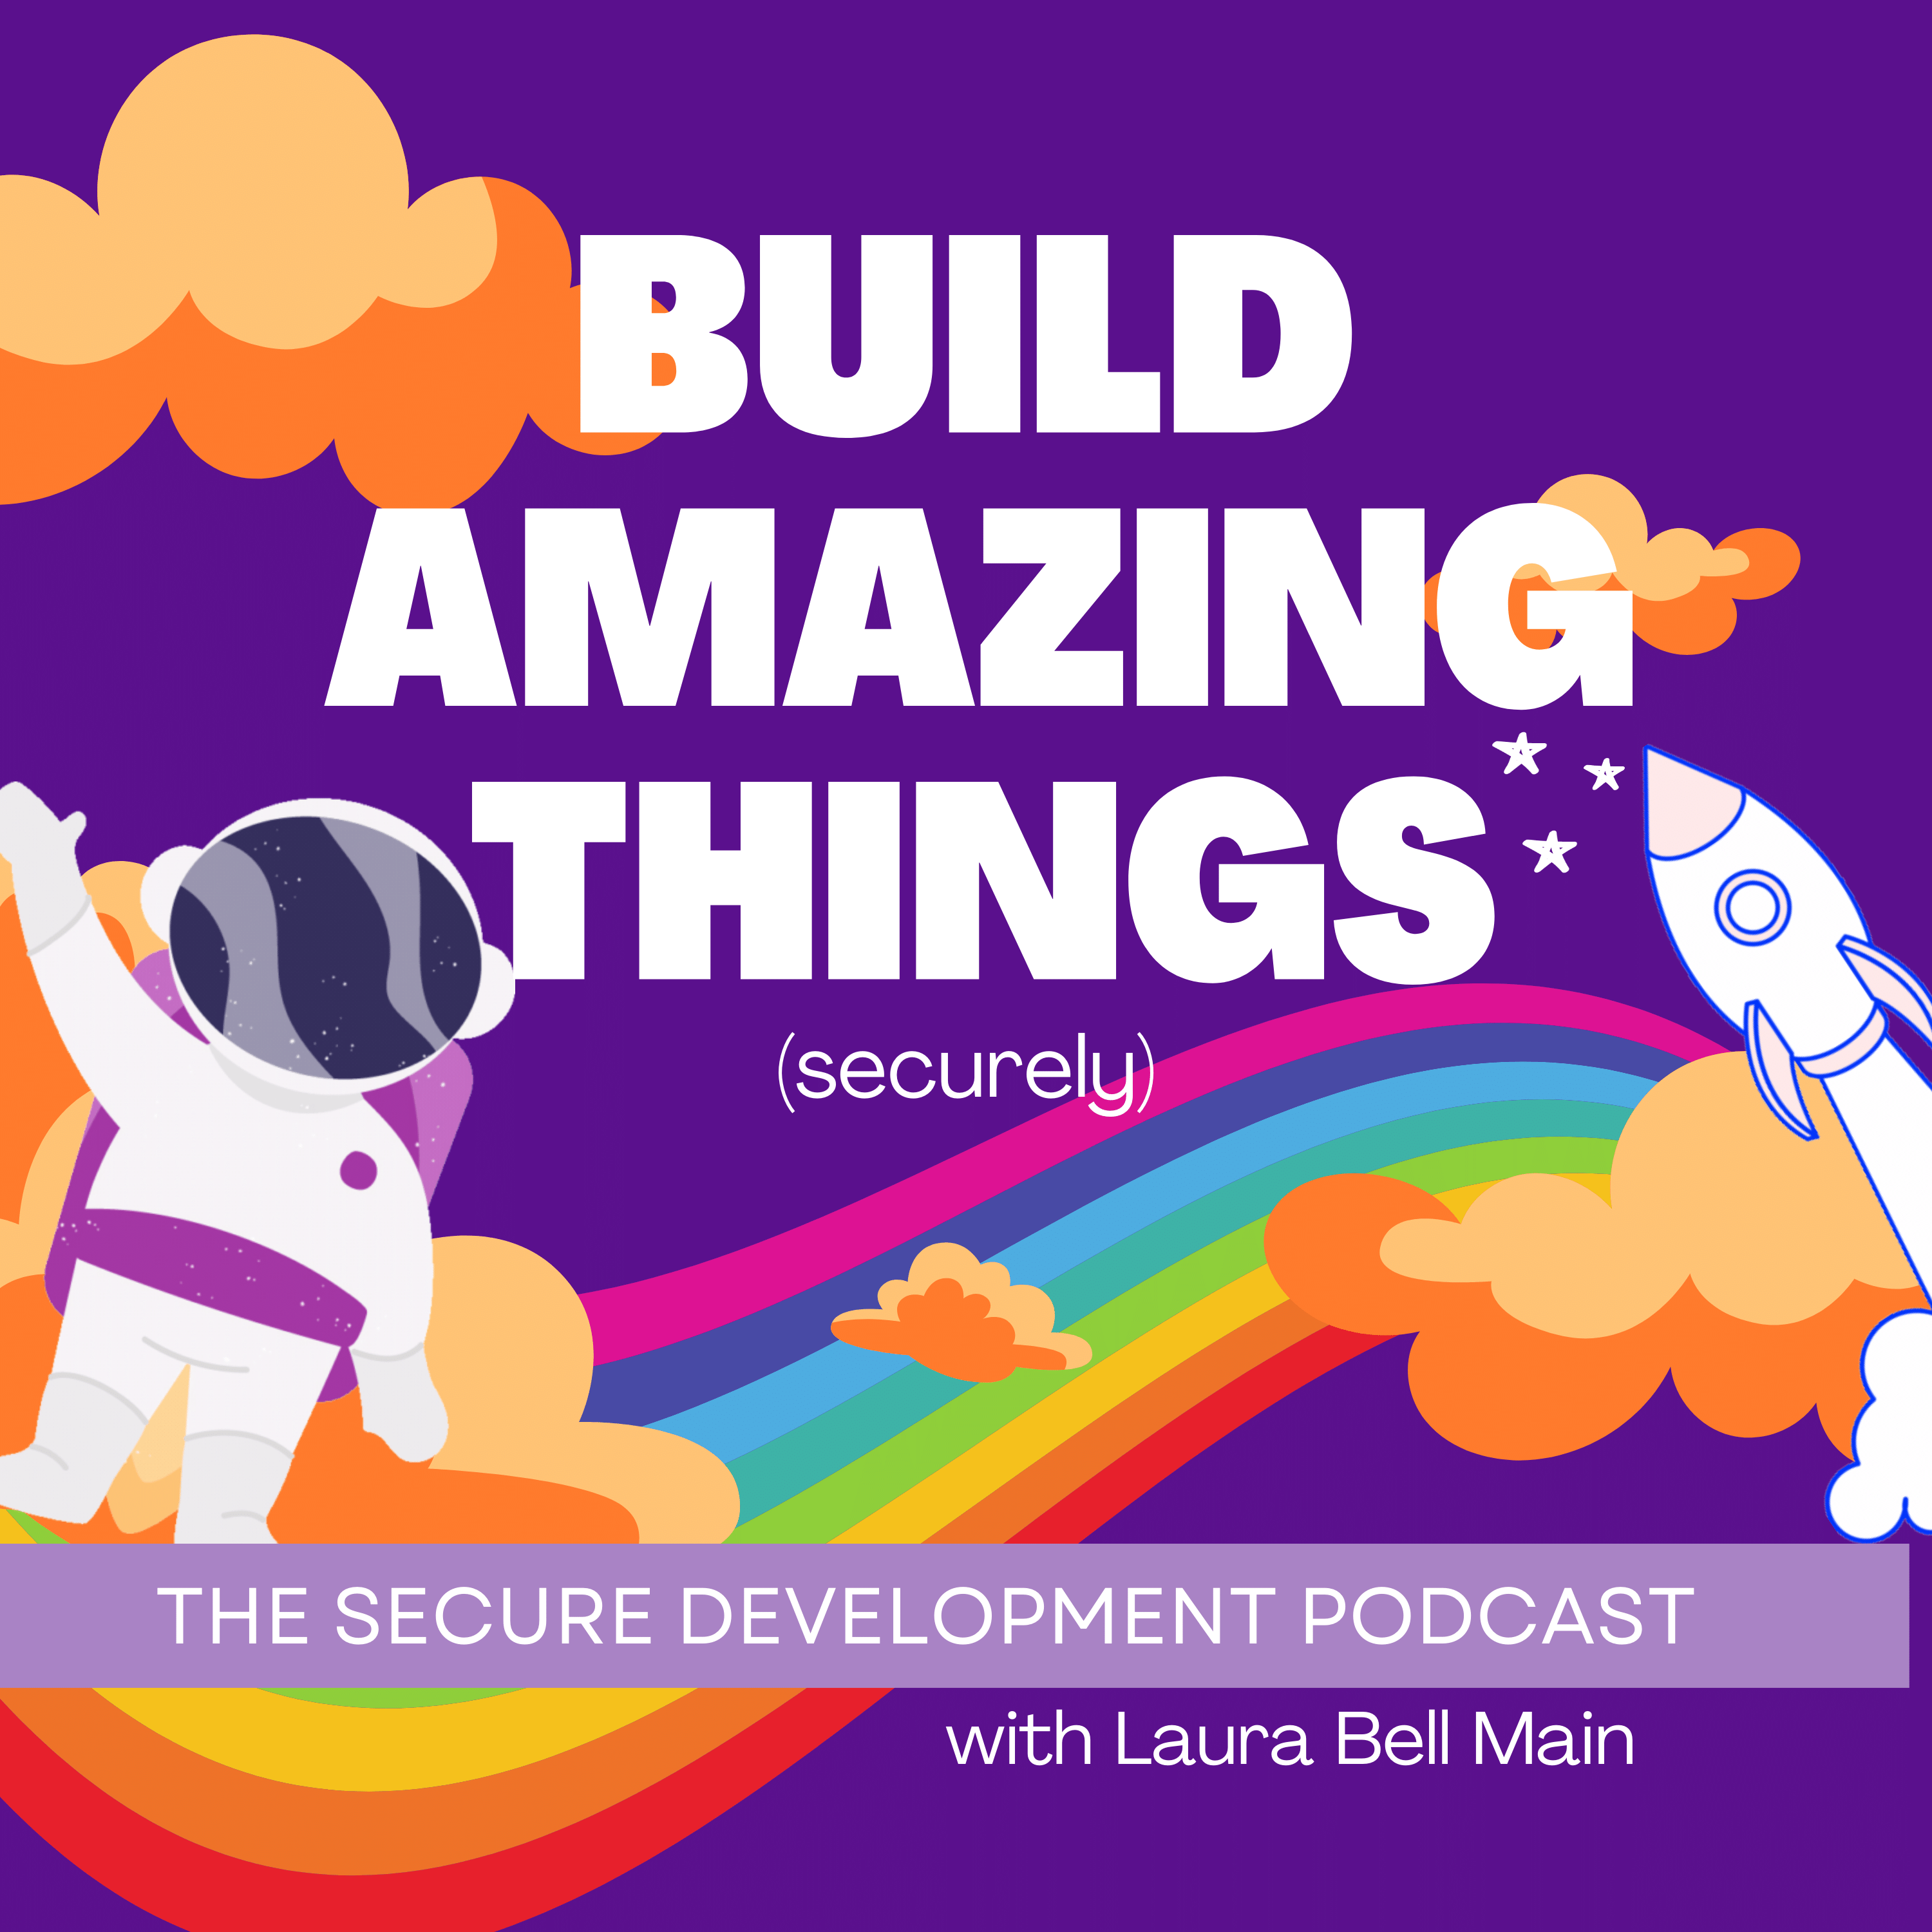 Build Amazing Things (securely) - The Secure Development Podcast